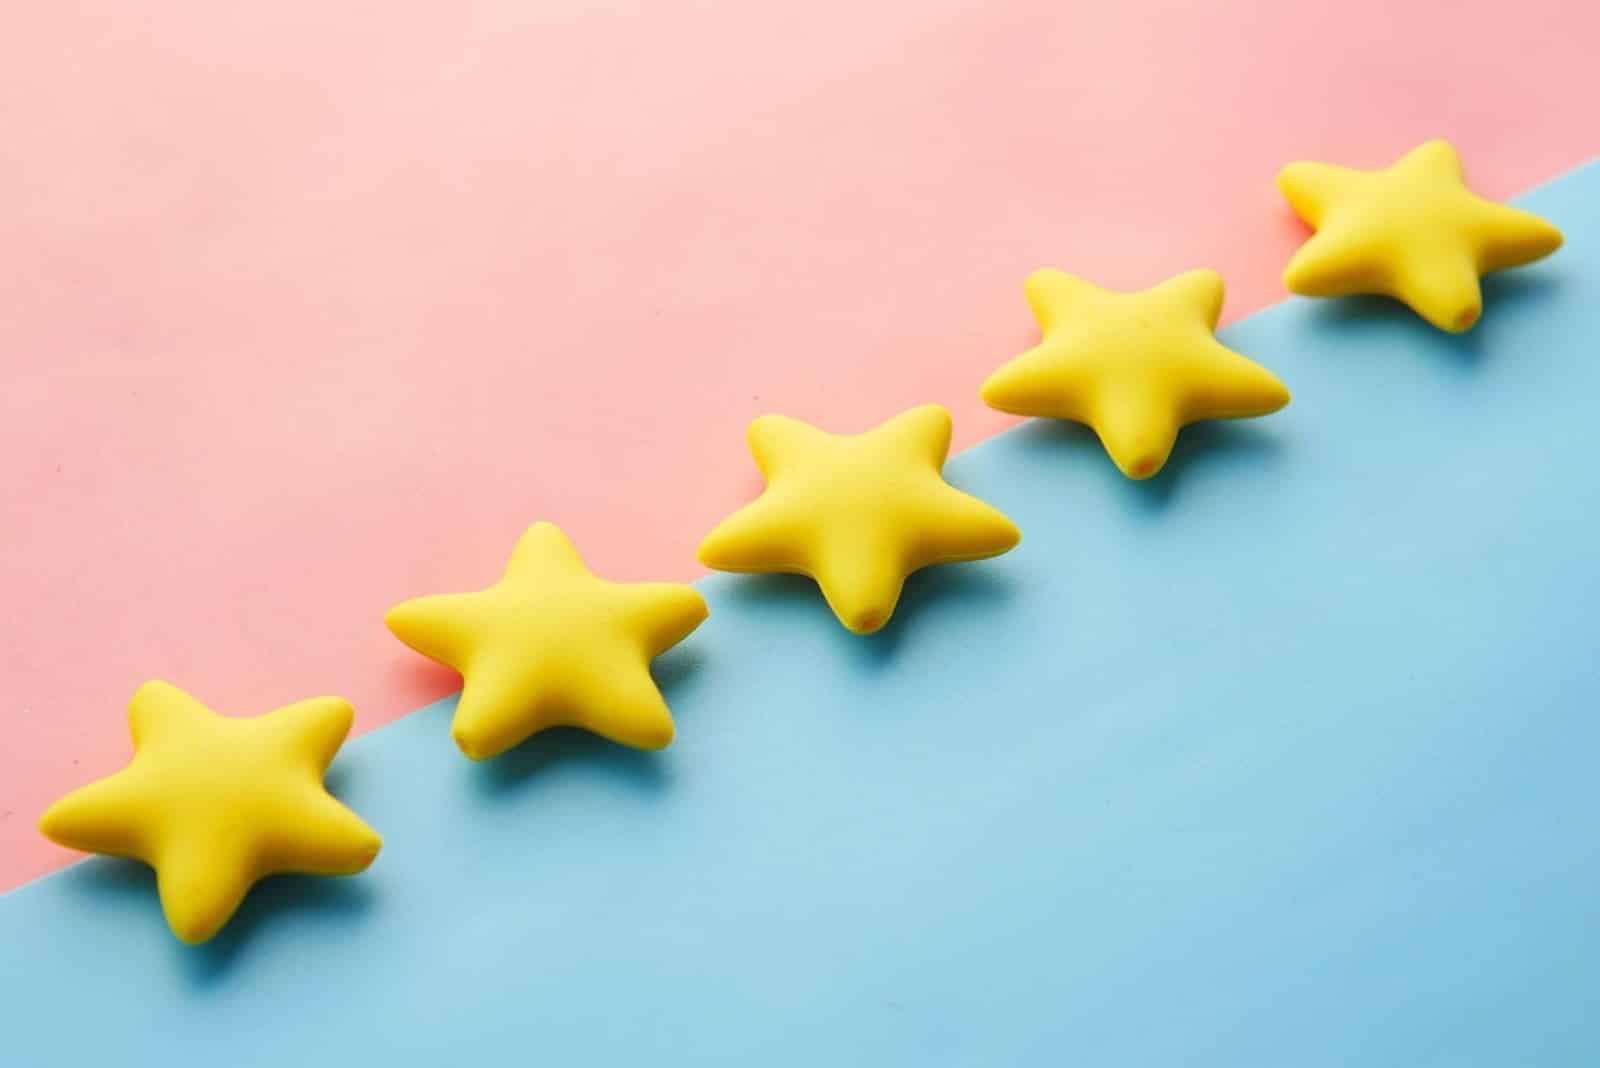 Get online reviews for your small business feature image. A diagonal line of yellow stars on a dual background with pink on the left and blue on the right for our article.